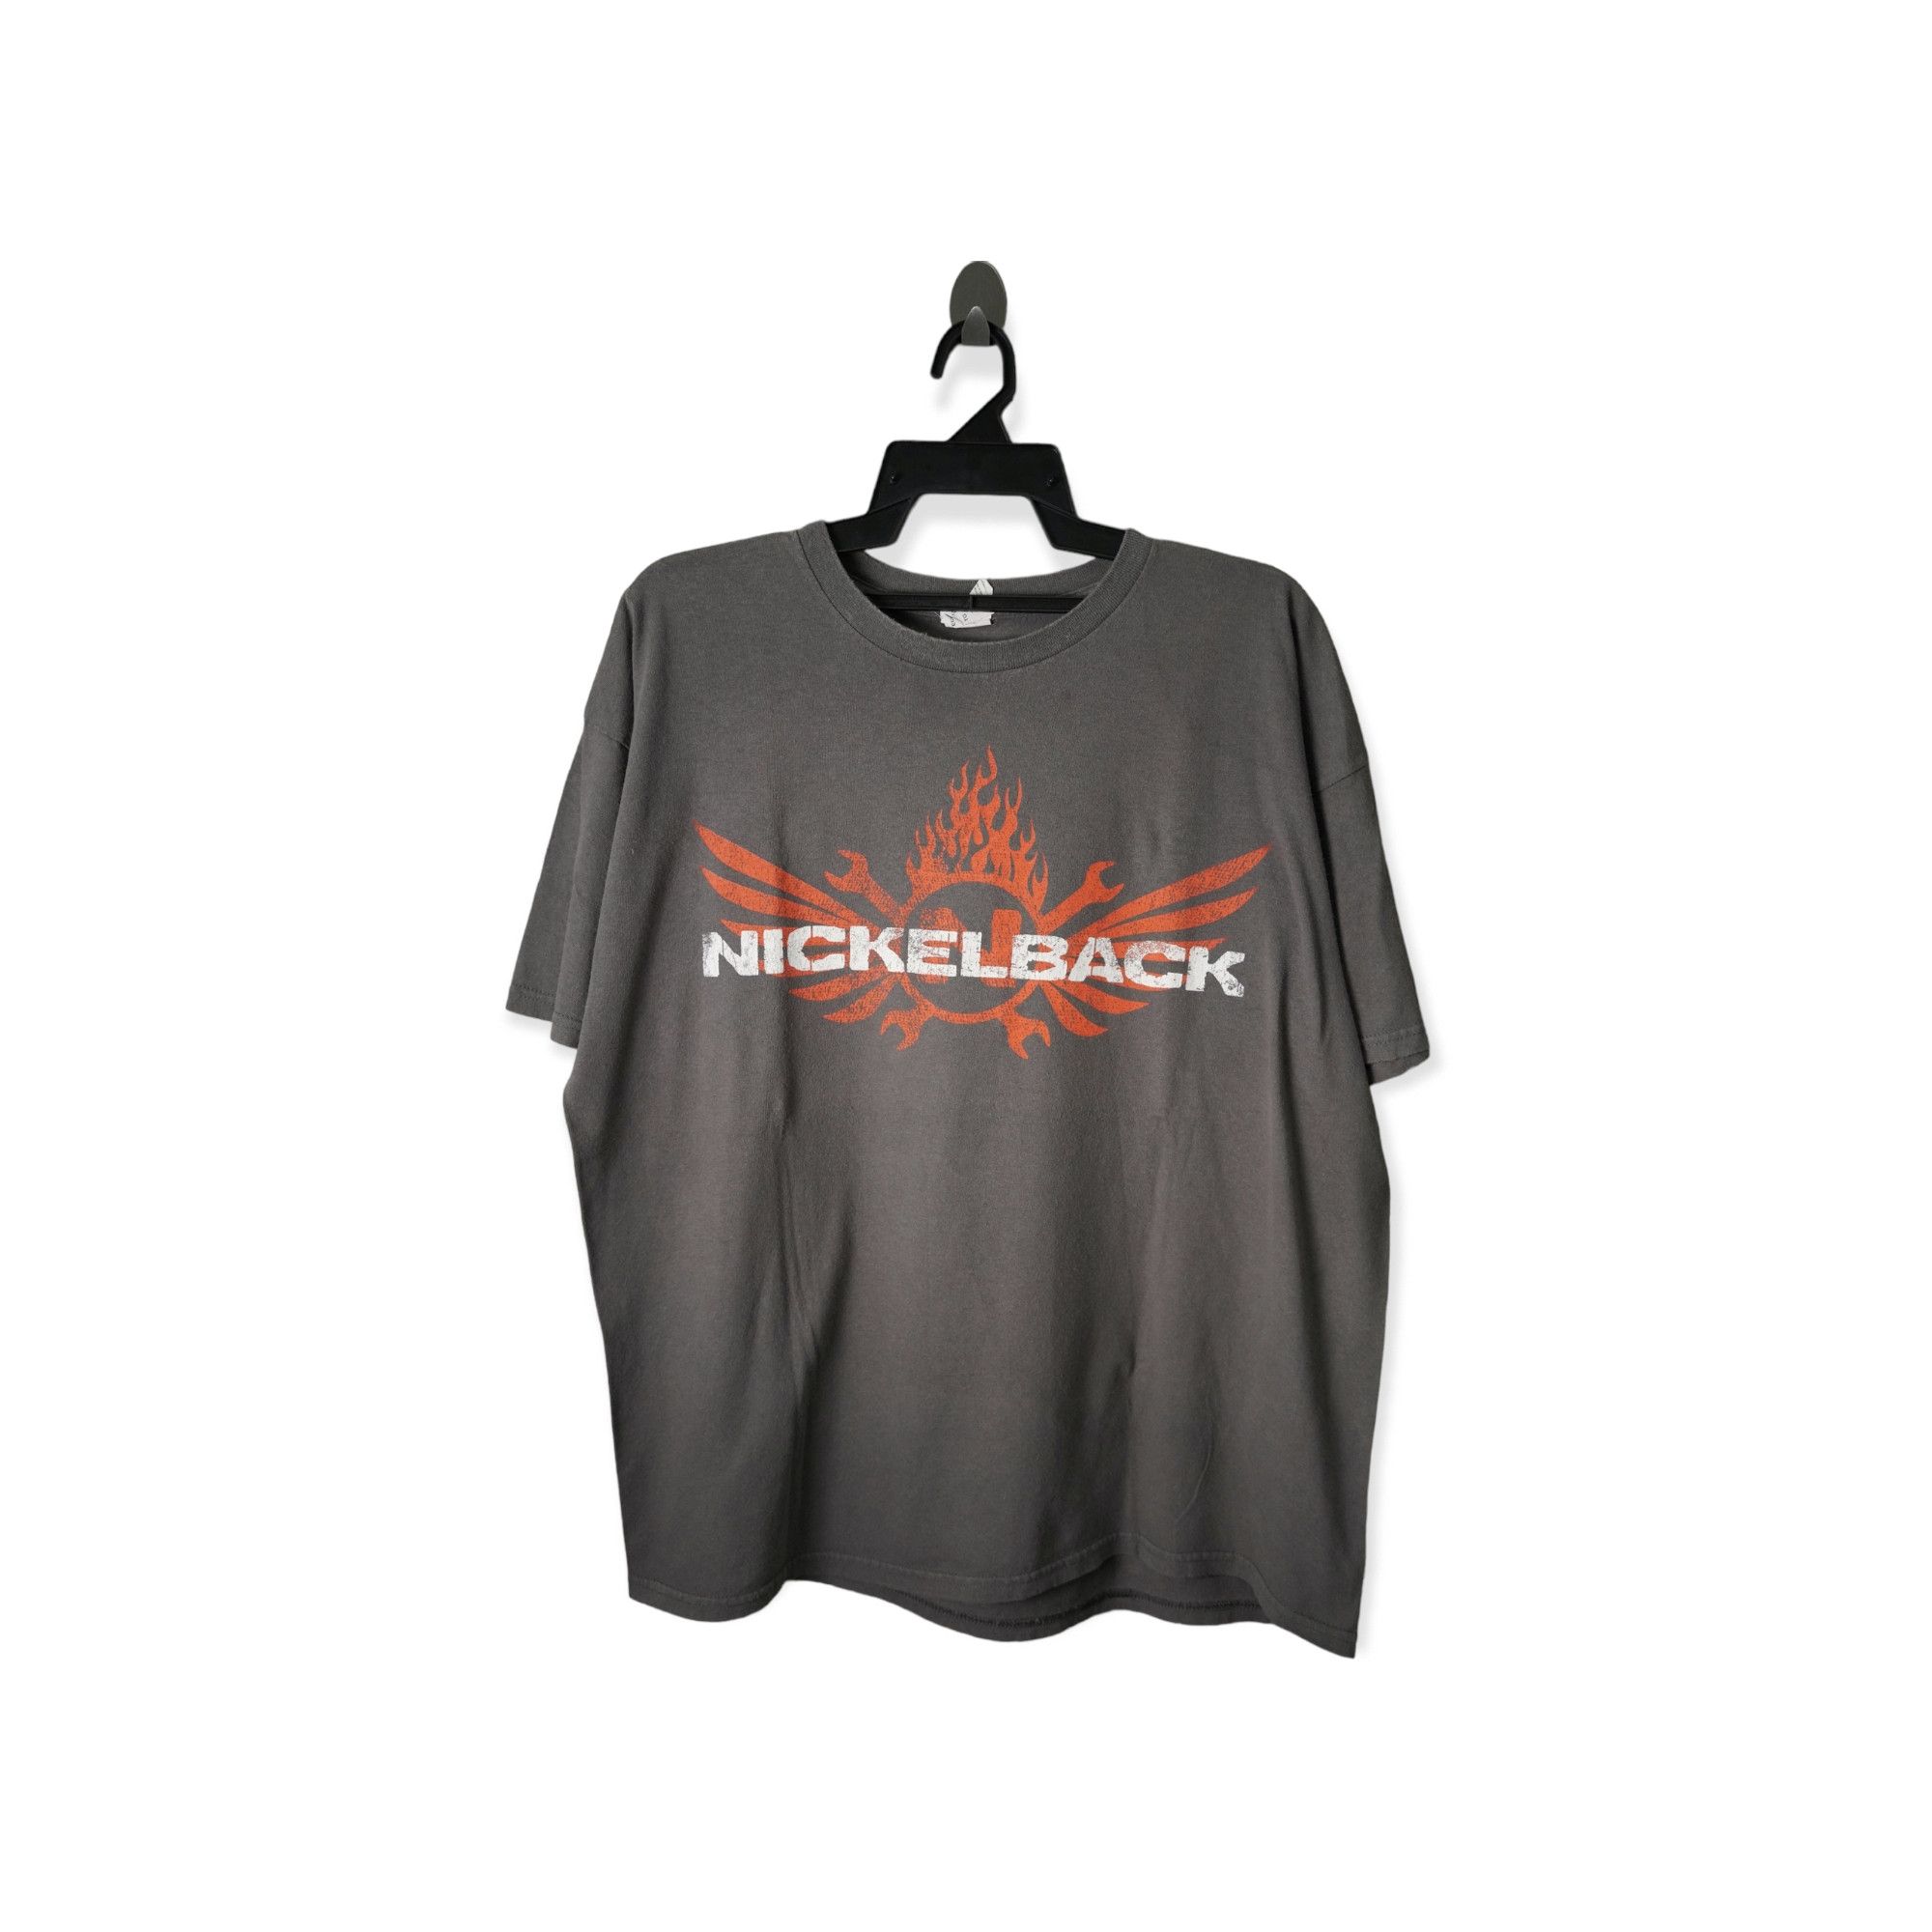 Tour Tee Nickelback Here and Now North American Tour 2012 Size US XL / EU 56 / 4 - 1 Preview